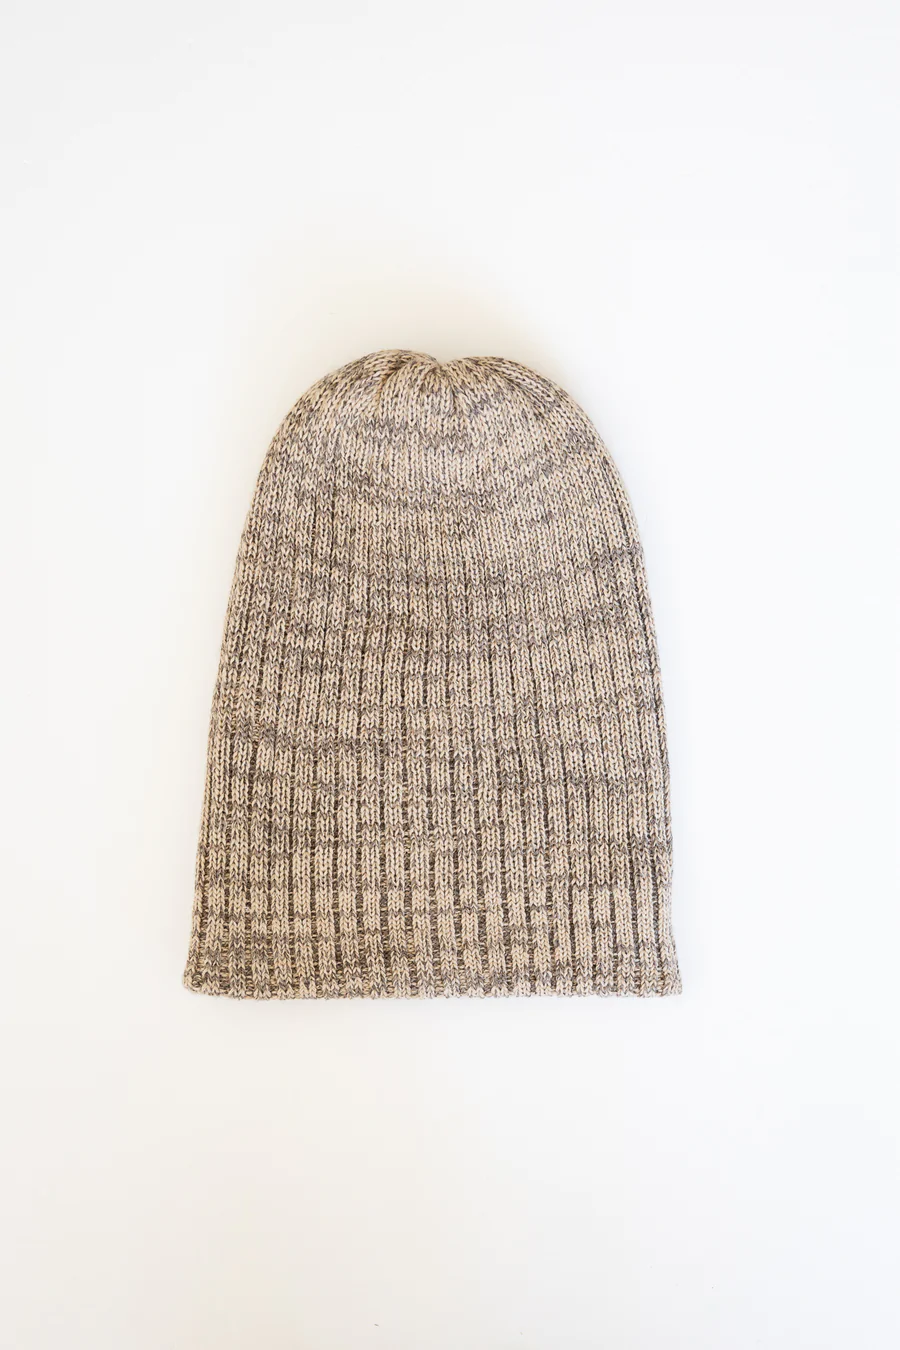 Product Image for Marled Rib Hat, Sandstone